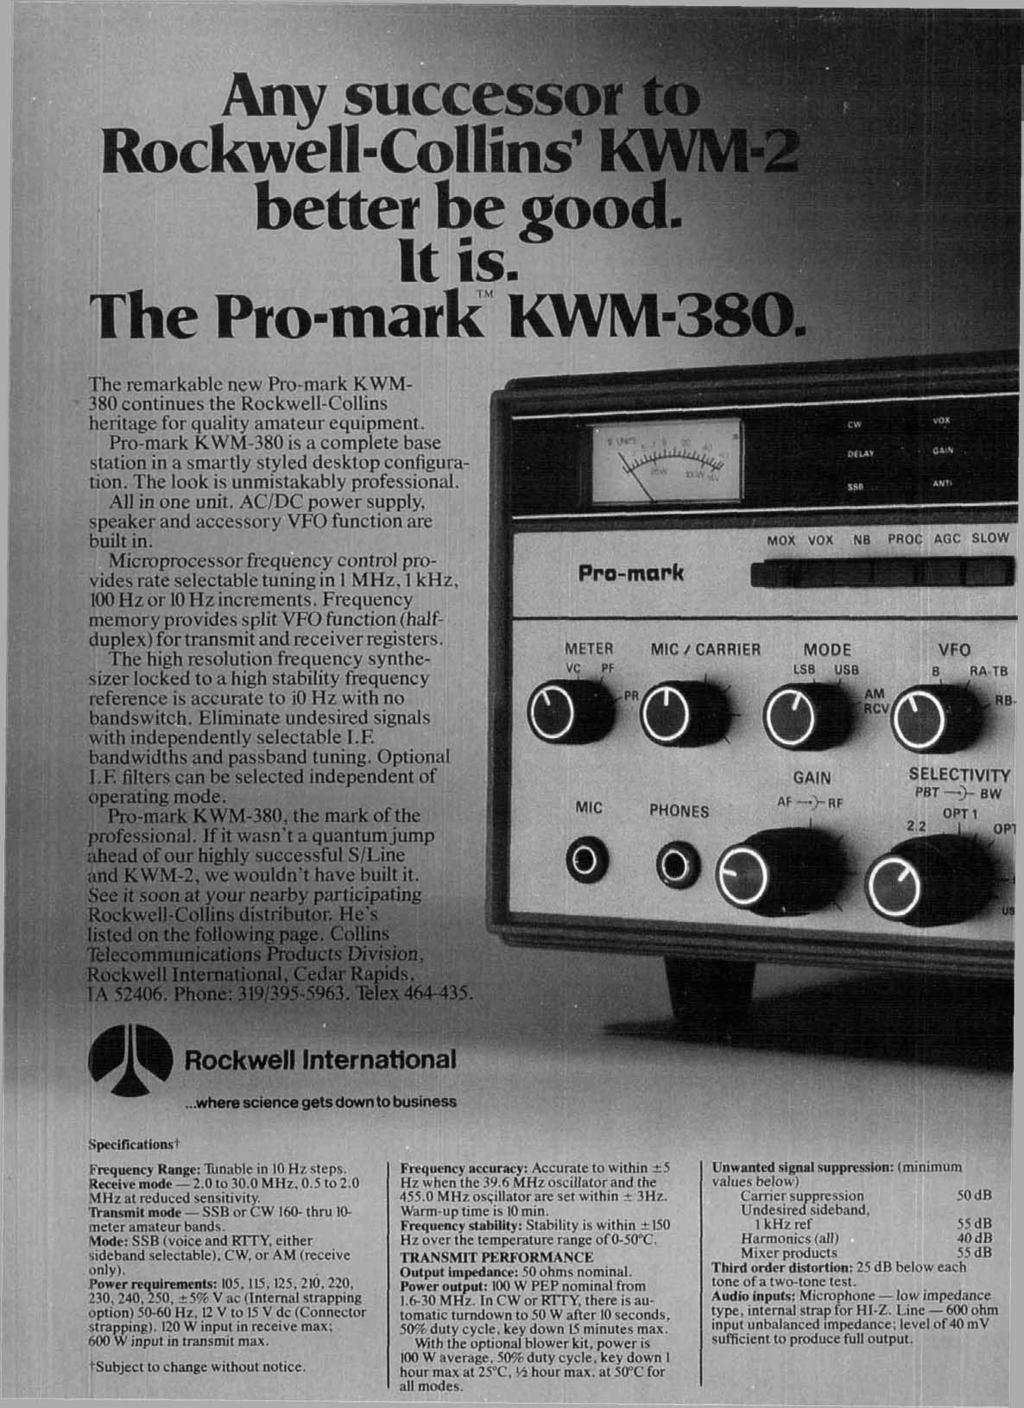 Roc ~nv successo The The remarkat 380 continues heritage for quality amateur equipment. Pro-mark KWM-380 is a complete base station in a smartly styled desktop configuration.